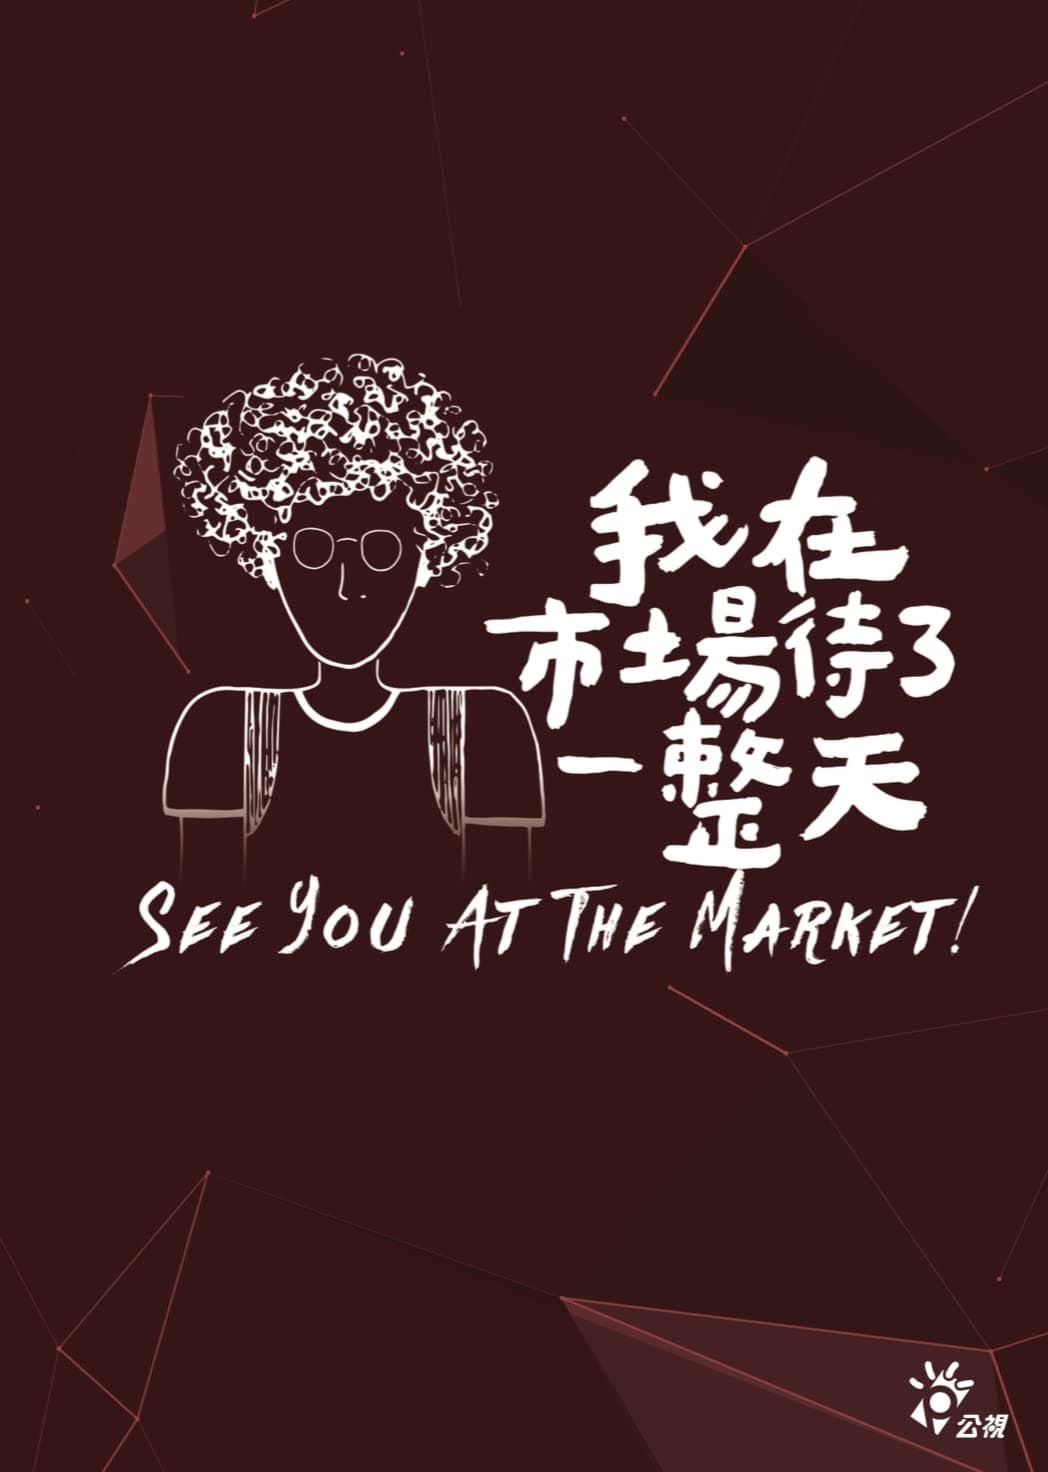 see you at the market!